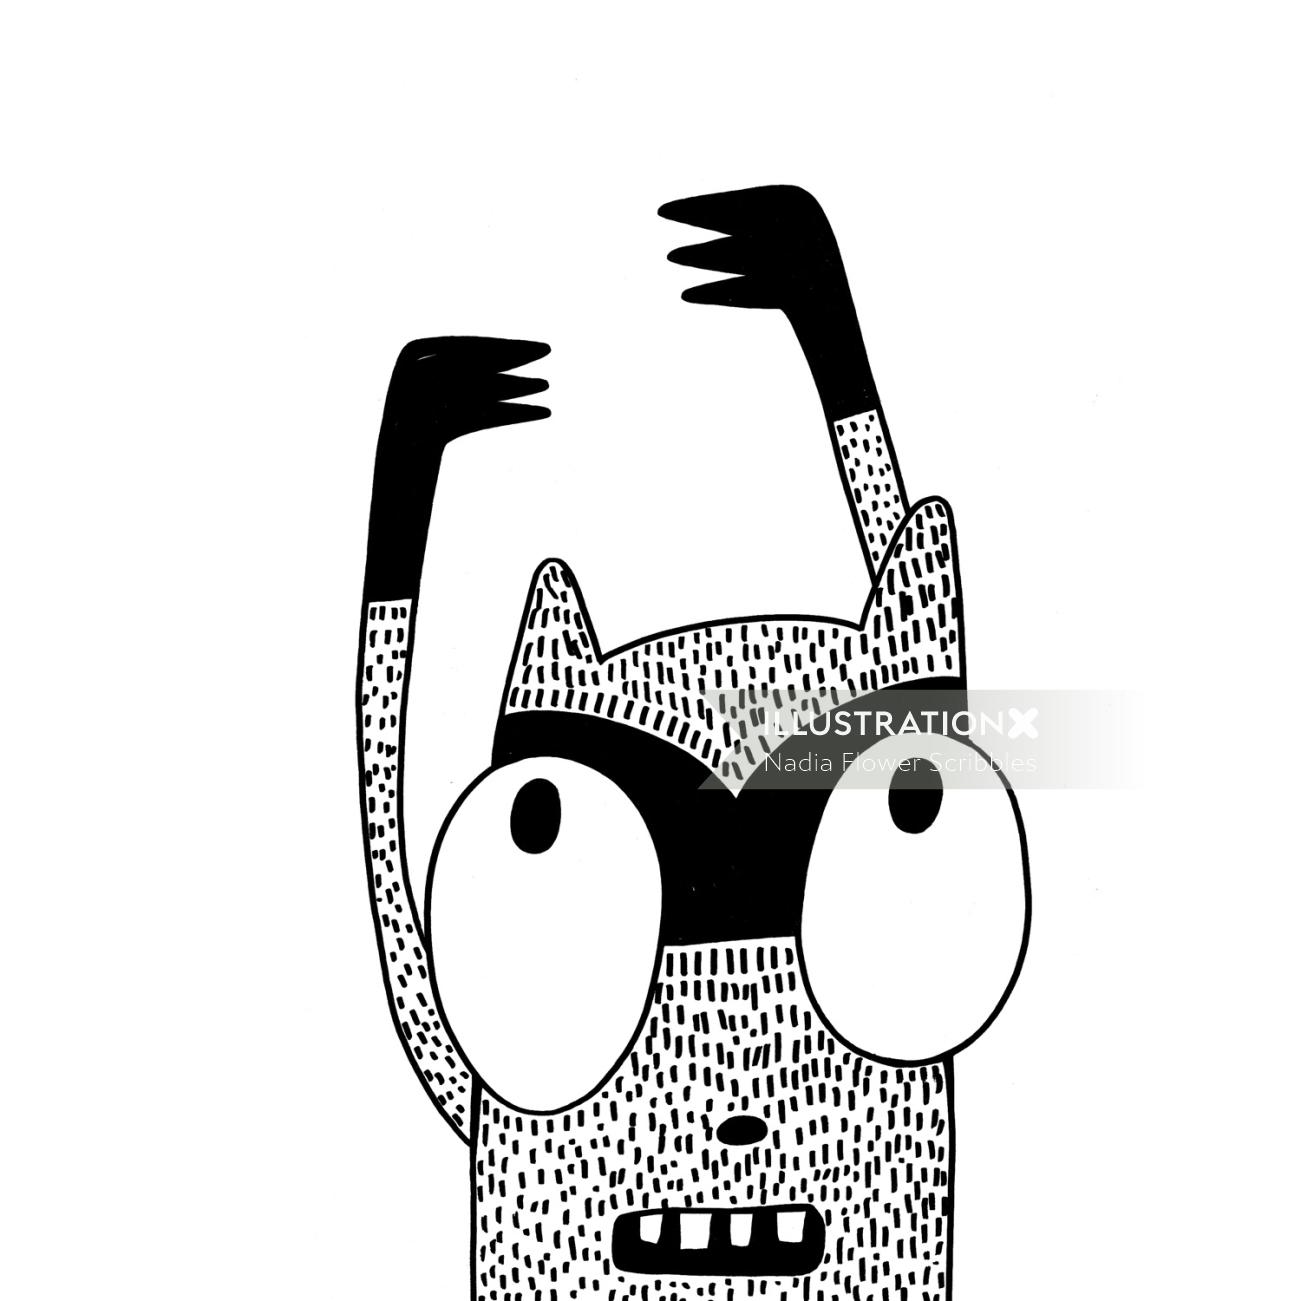 Character design monster with hands up
